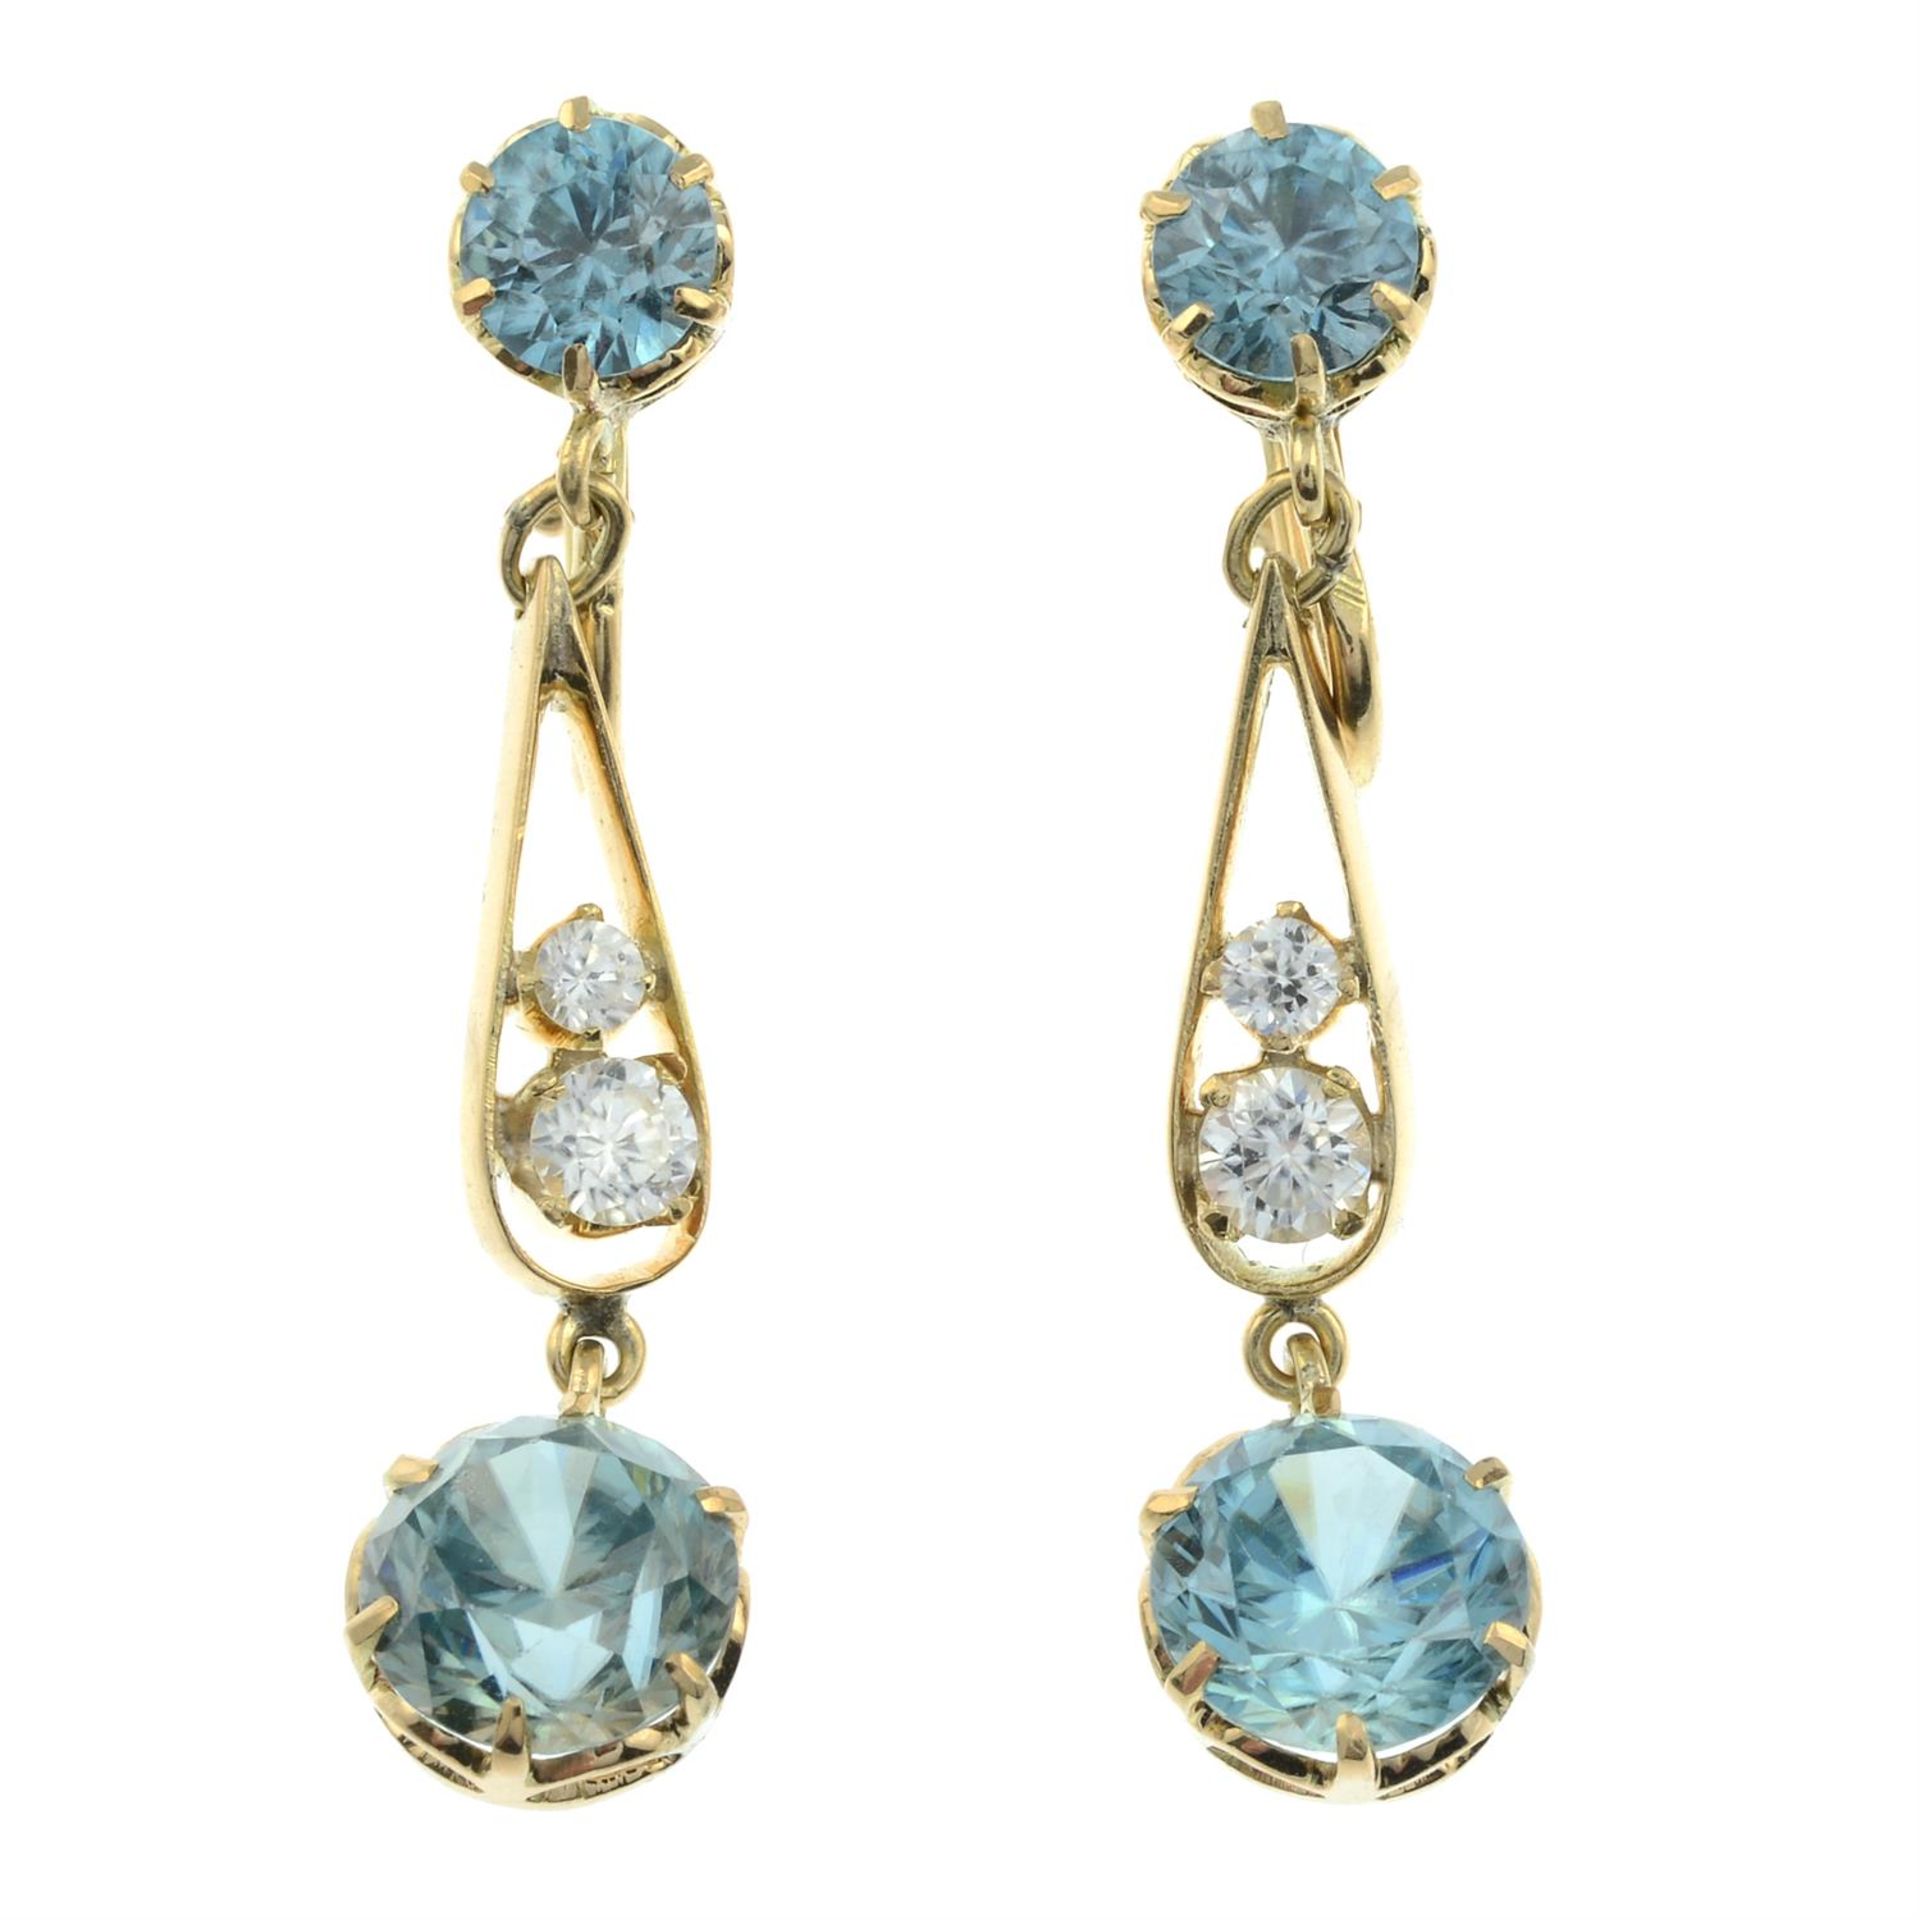 A pair of blue and colourless zircon drop earrings.